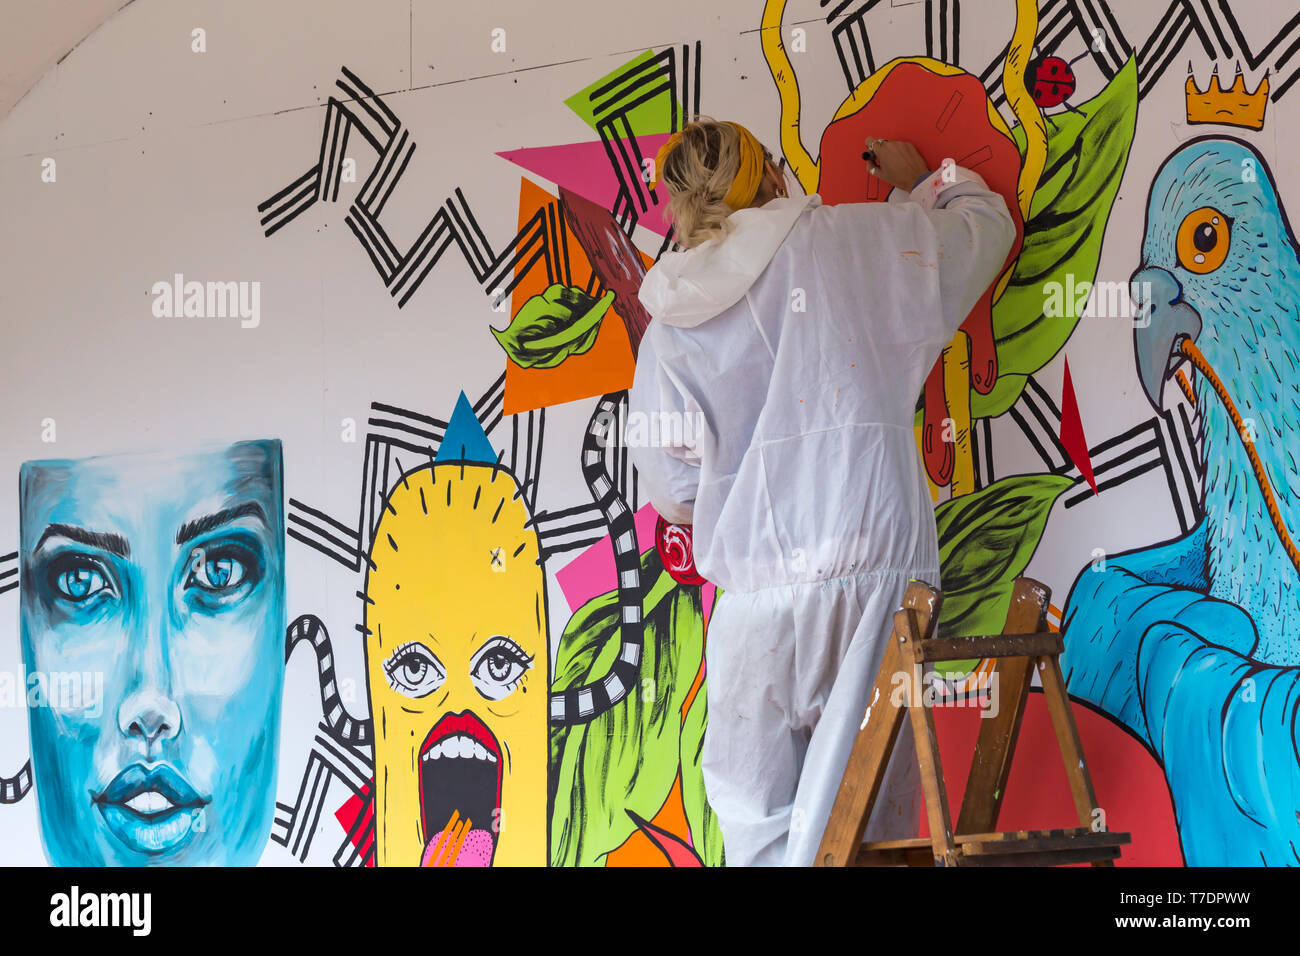 Boscombe, Bournemouth, Dorset, UK. 6th May 2019. Bournemouth Emerging Arts Fringe (BEAF) Festival attracts visitors at Boscombe with arts exhibitions, music events, theatre, performances, film, dance, workshops. The Coffee Cup Project creating artworks for everyone to join in. Credit: Carolyn Jenkins/Alamy Live News Stock Photo